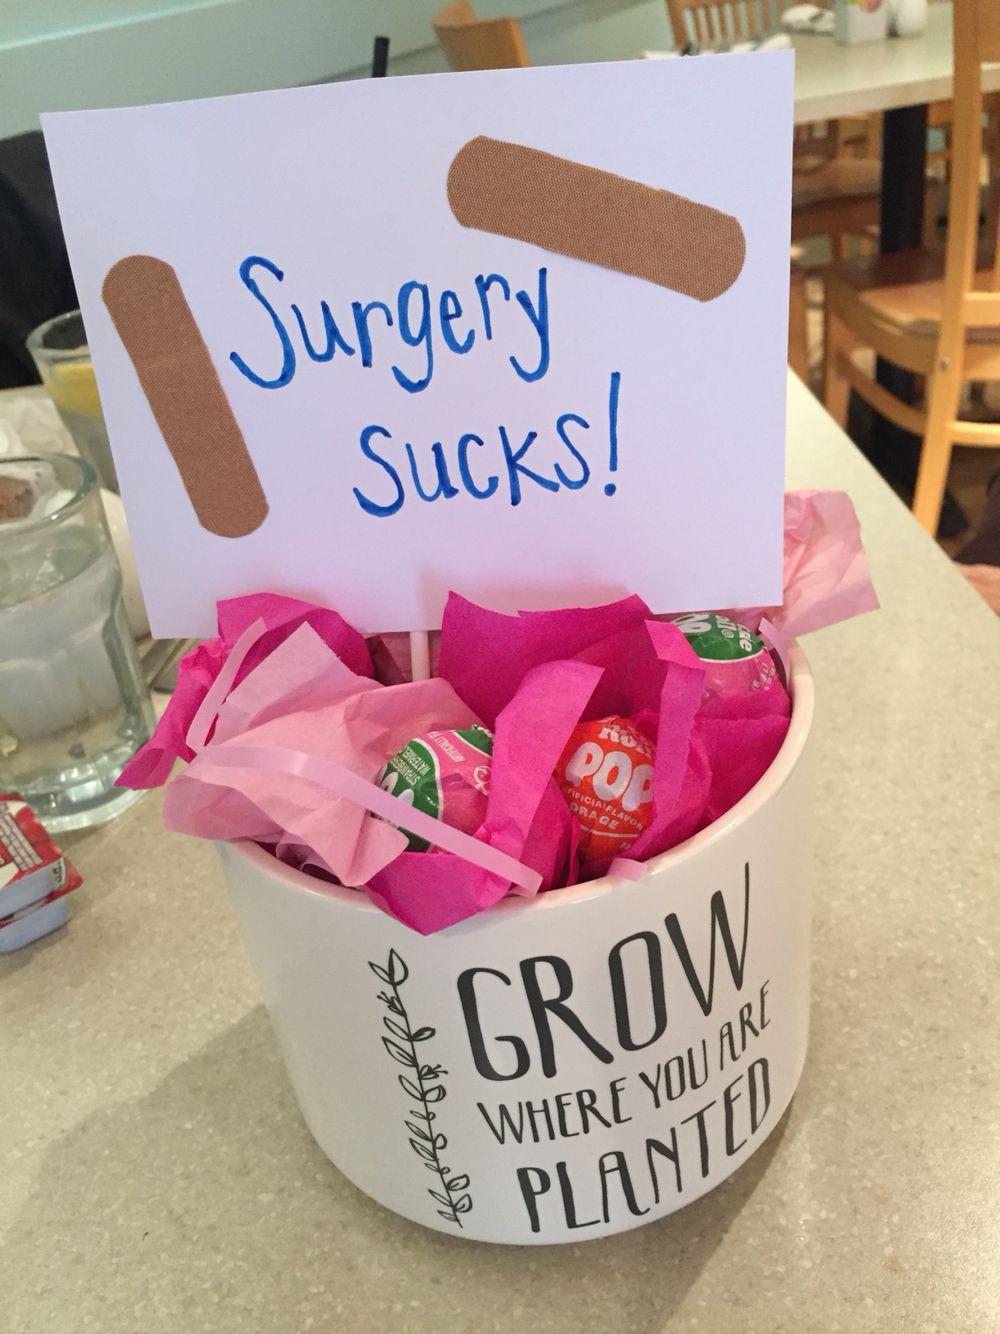 After Surgery Gift Basket Ideas
 DIY t for friend family having surgery Fill vase with